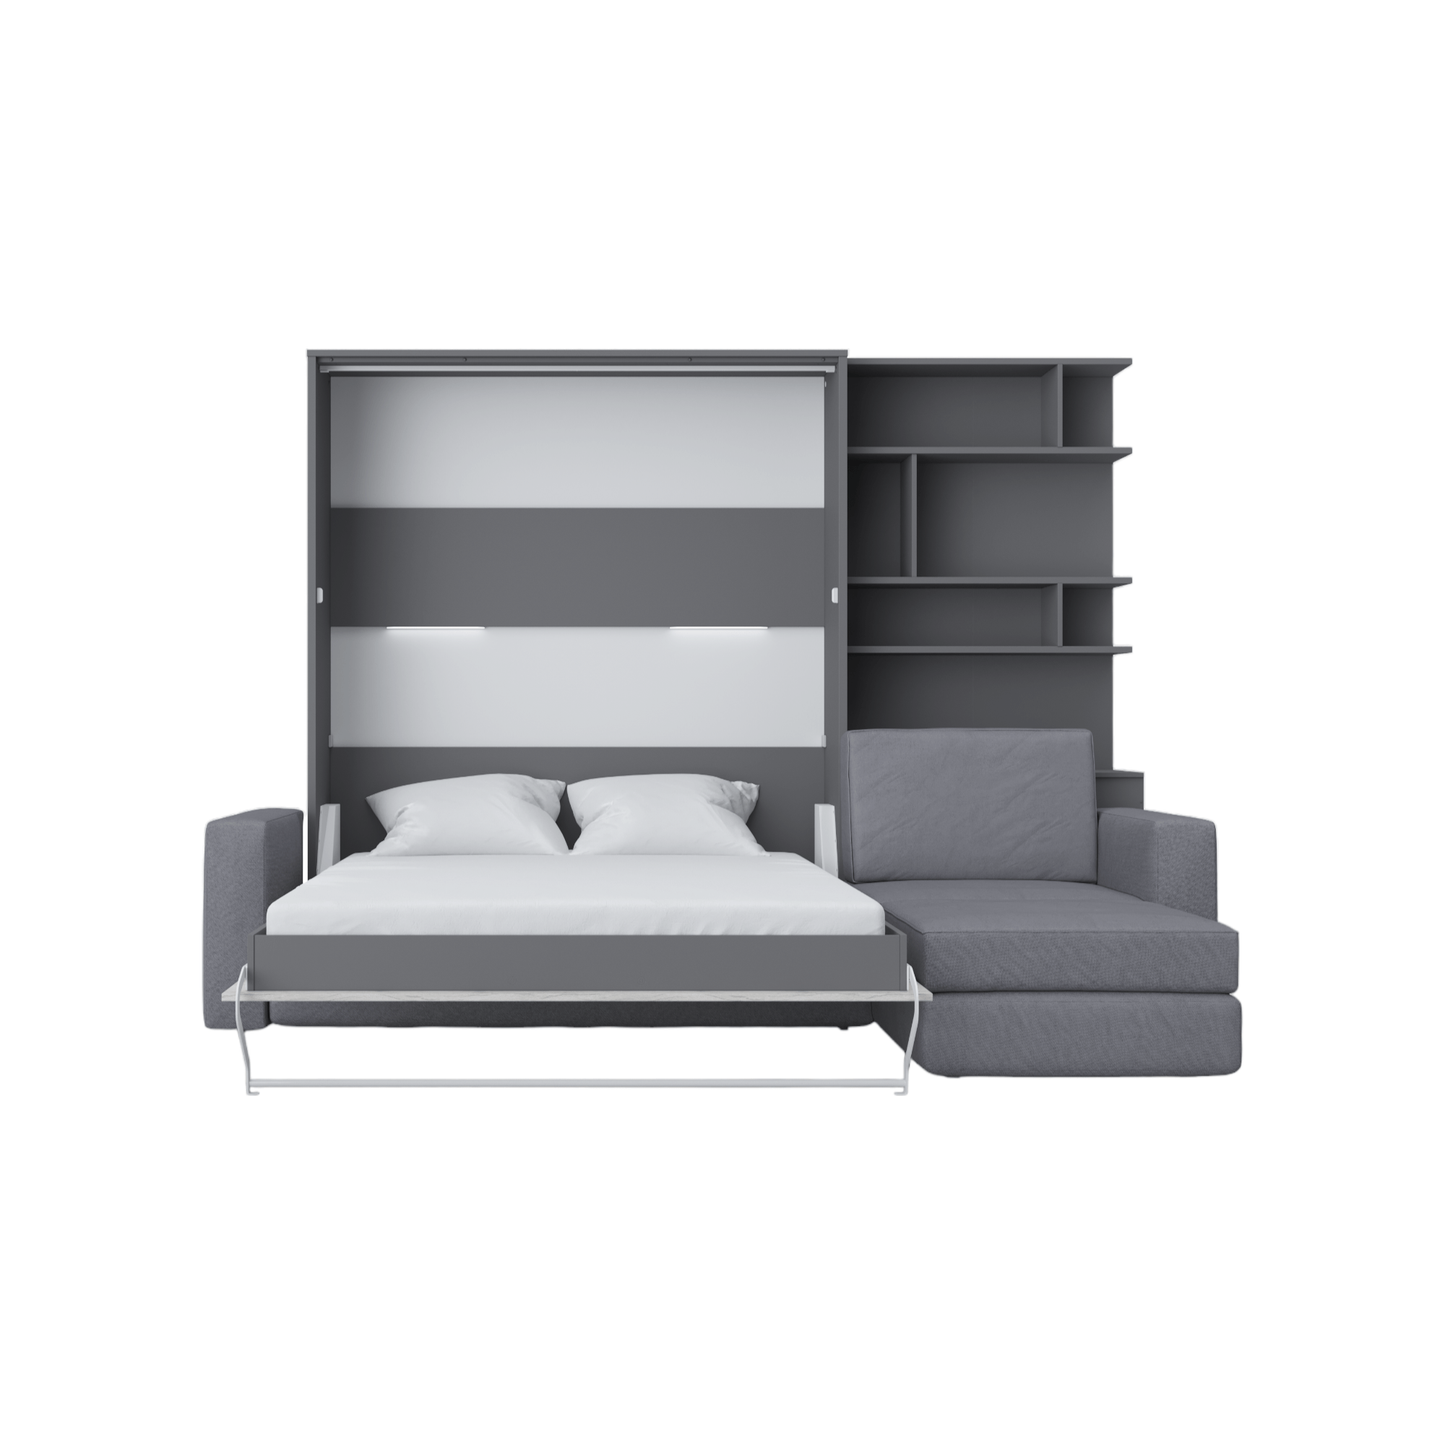 Maxima House Murphy Bed INVENTO European Queen size with a Sectional Sofa and a Bookcase IN014/17GW-LG